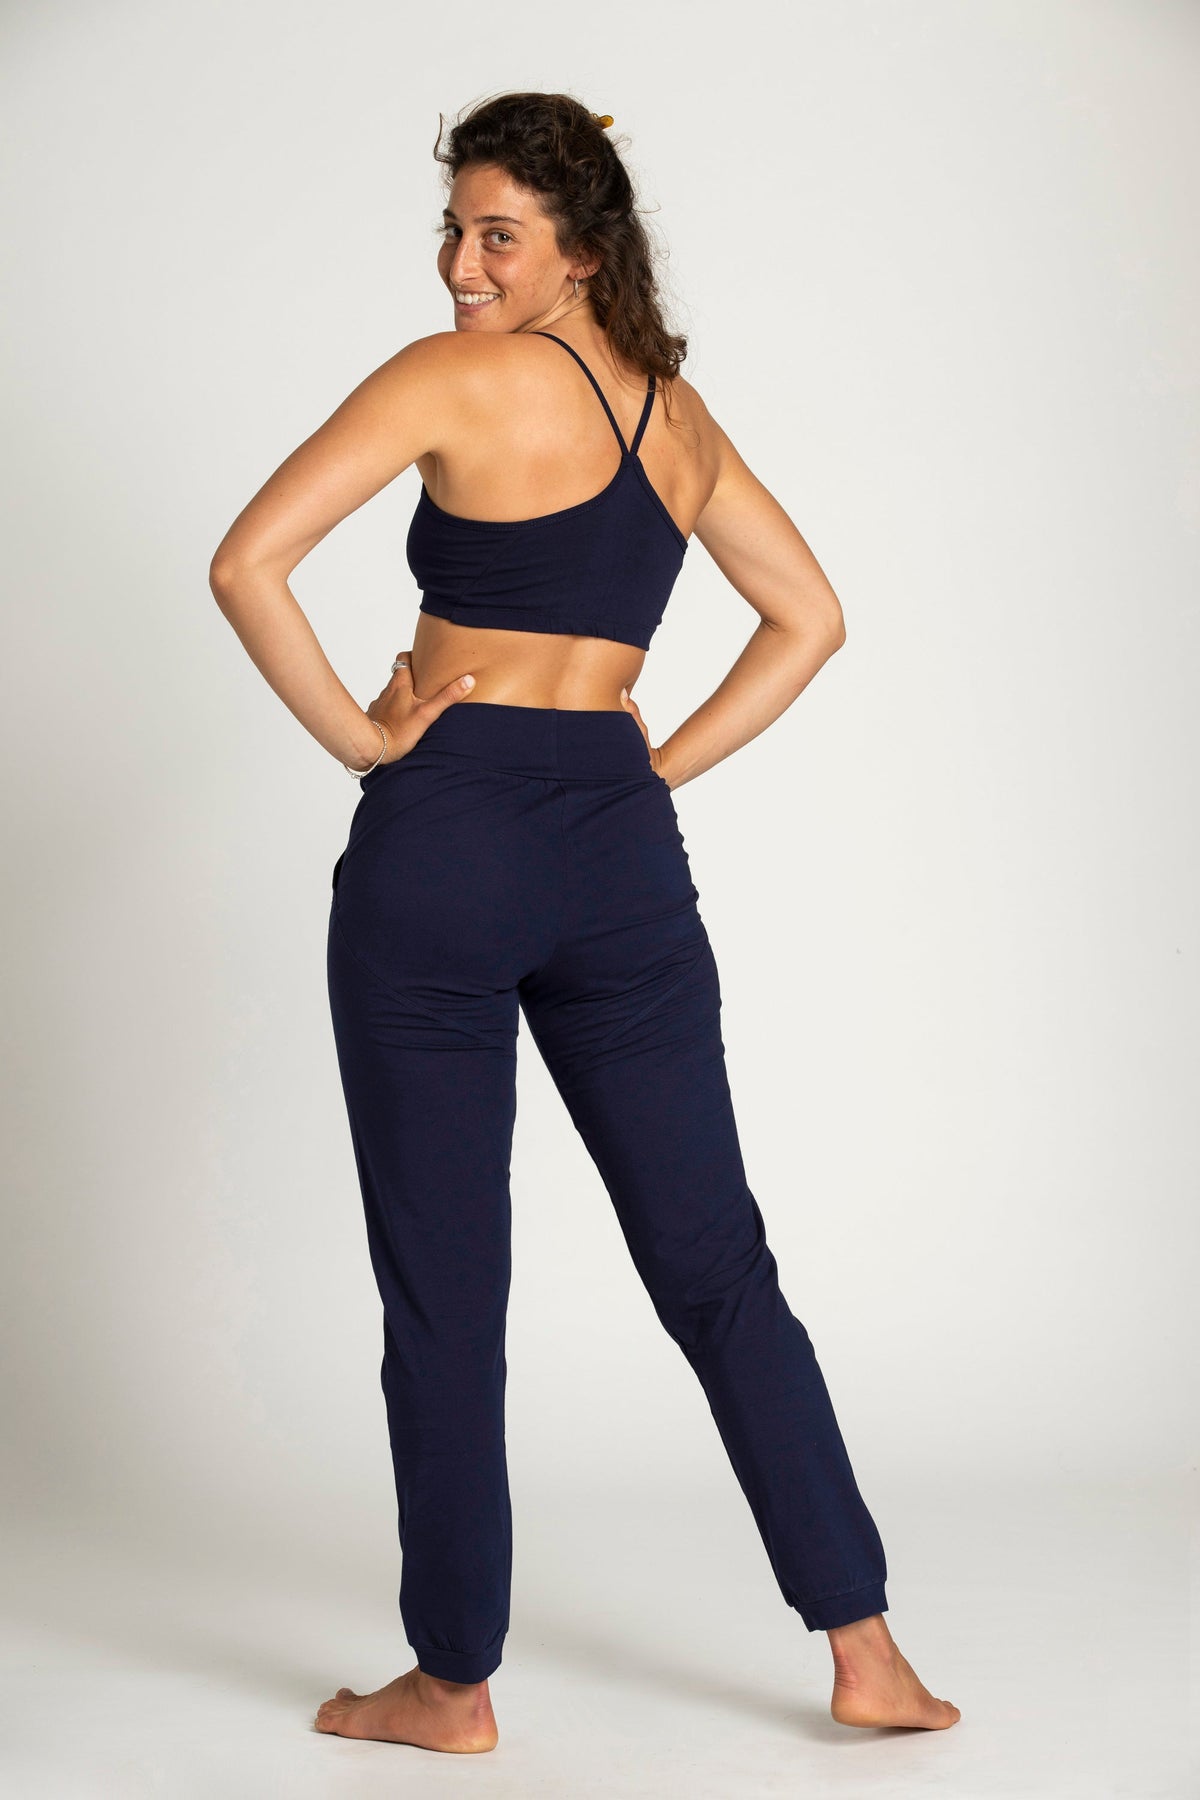 50%off I’mPerfect Organic Cotton Unisex Slouchy Pants was 35%off